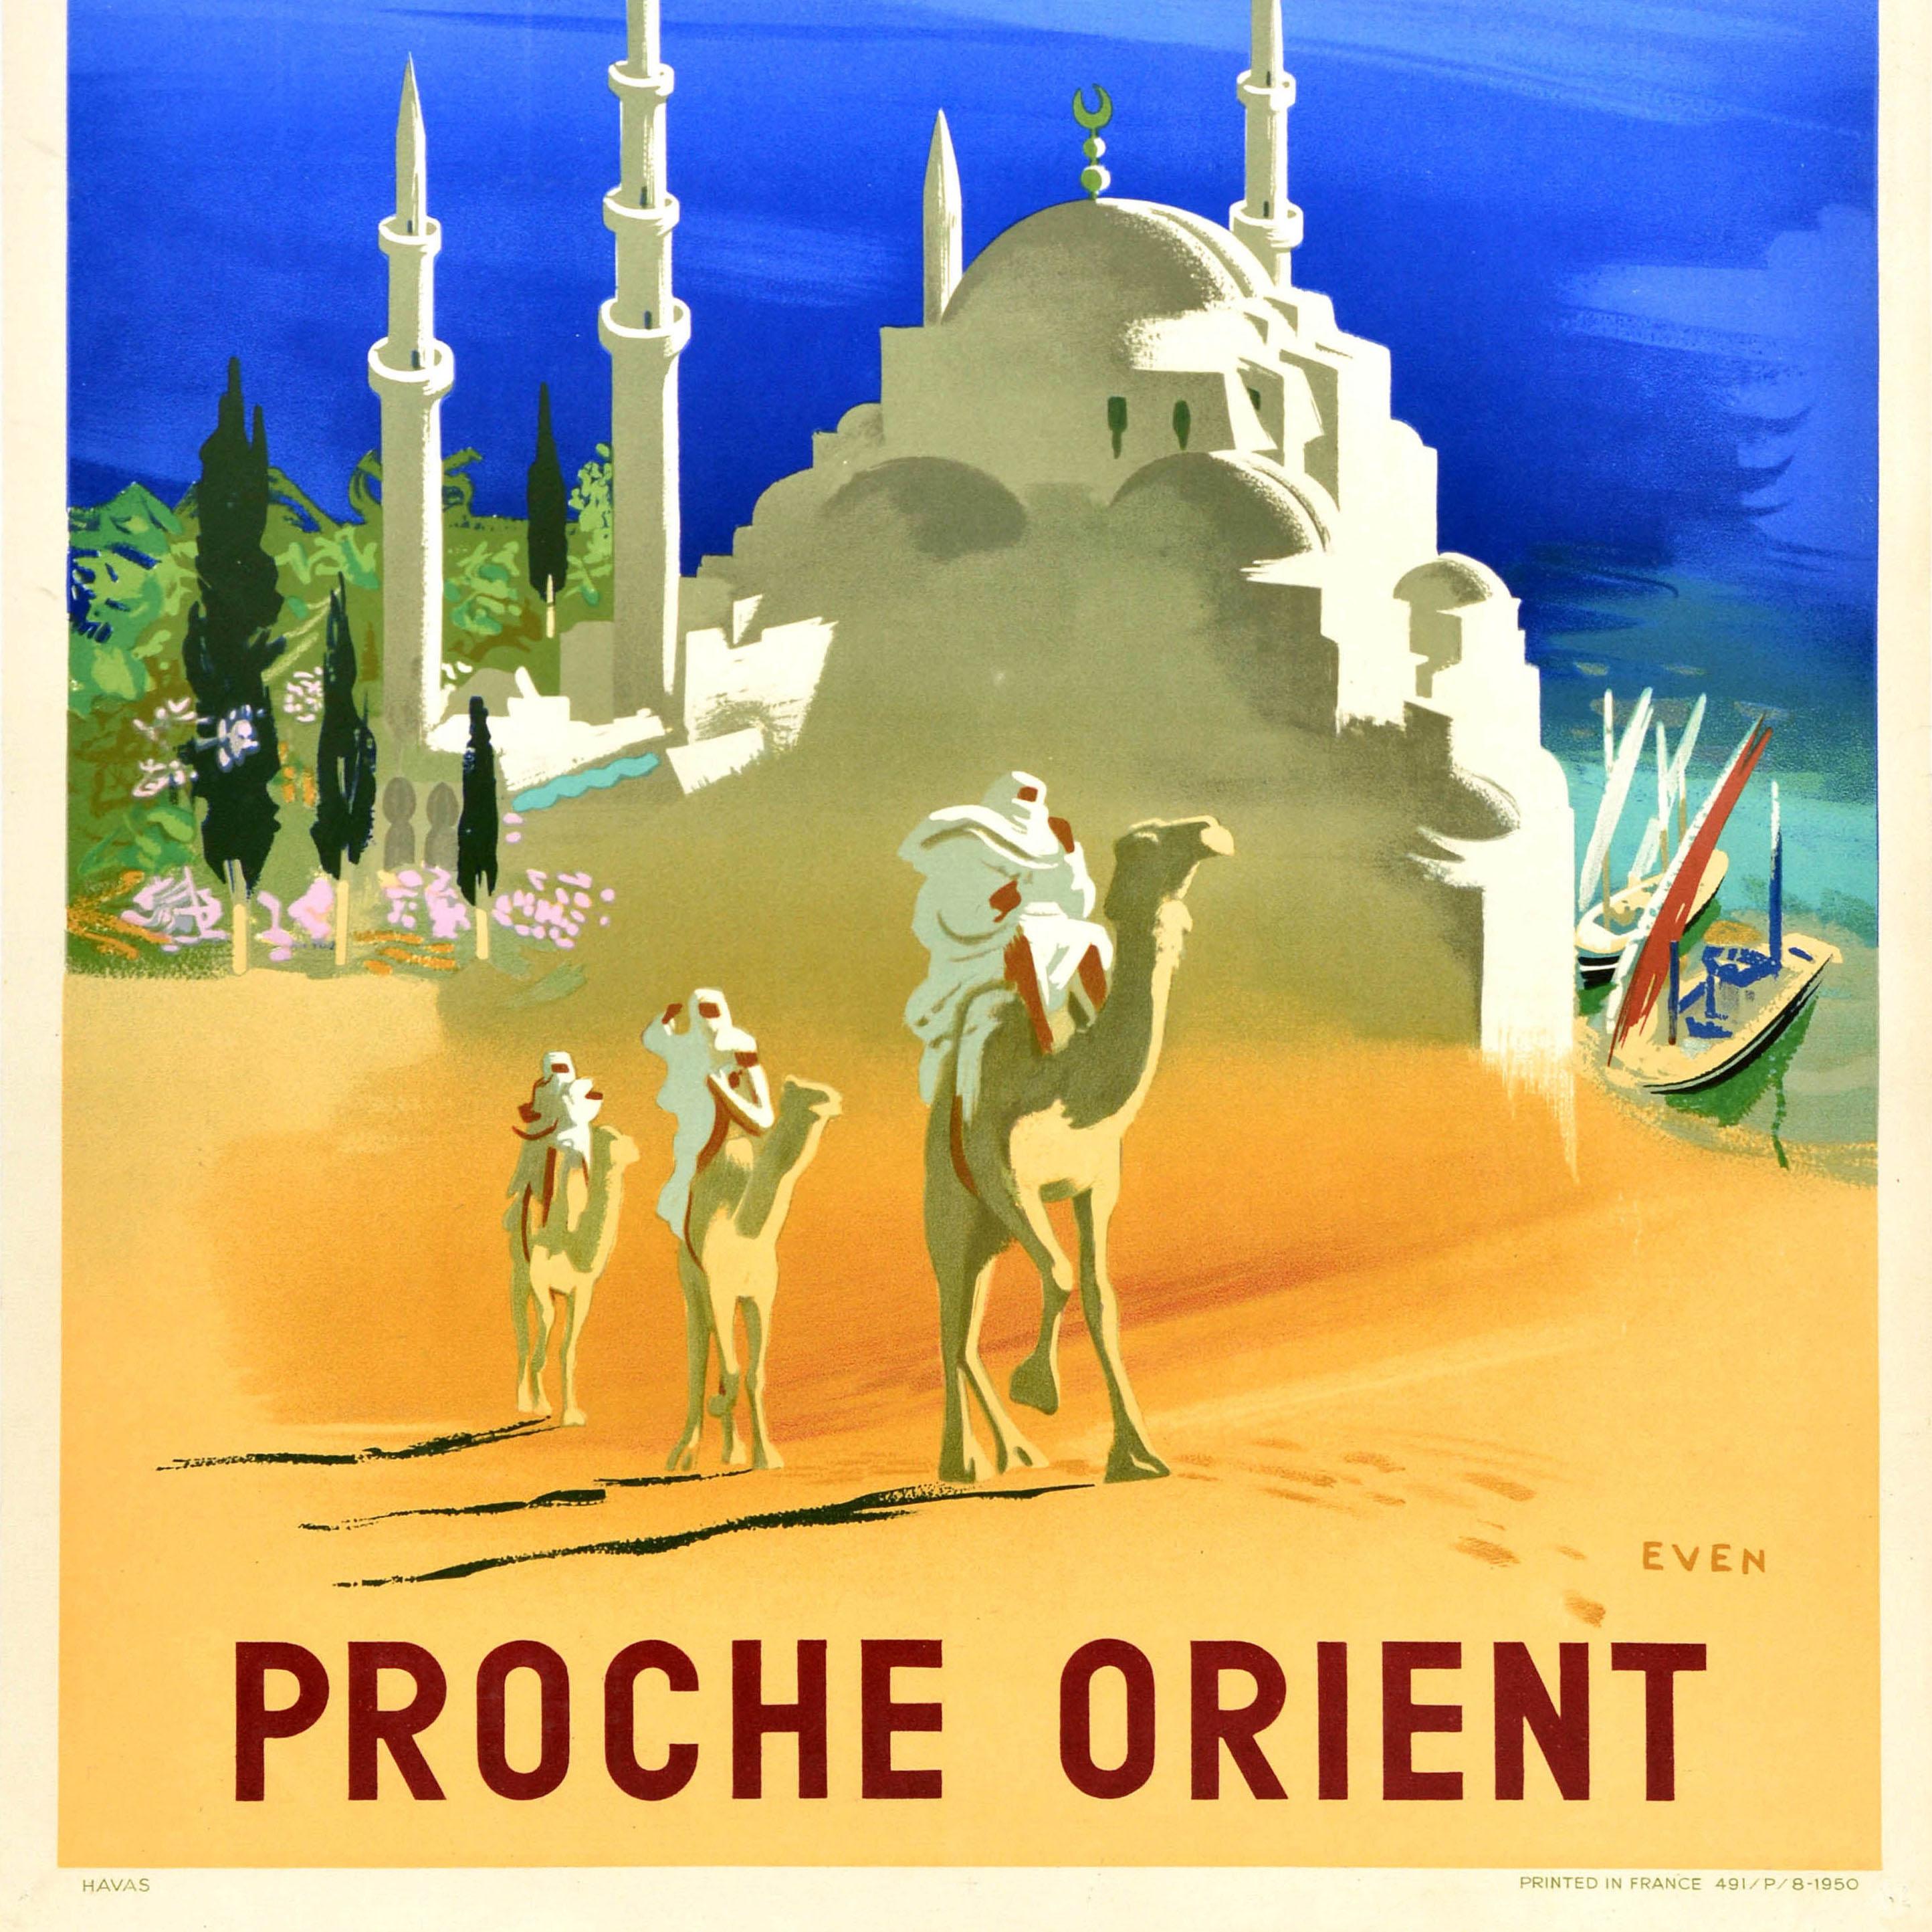 Original Vintage Travel Poster Air France Proche Orient Middle East Airline Art - Gray Print by Jean Even